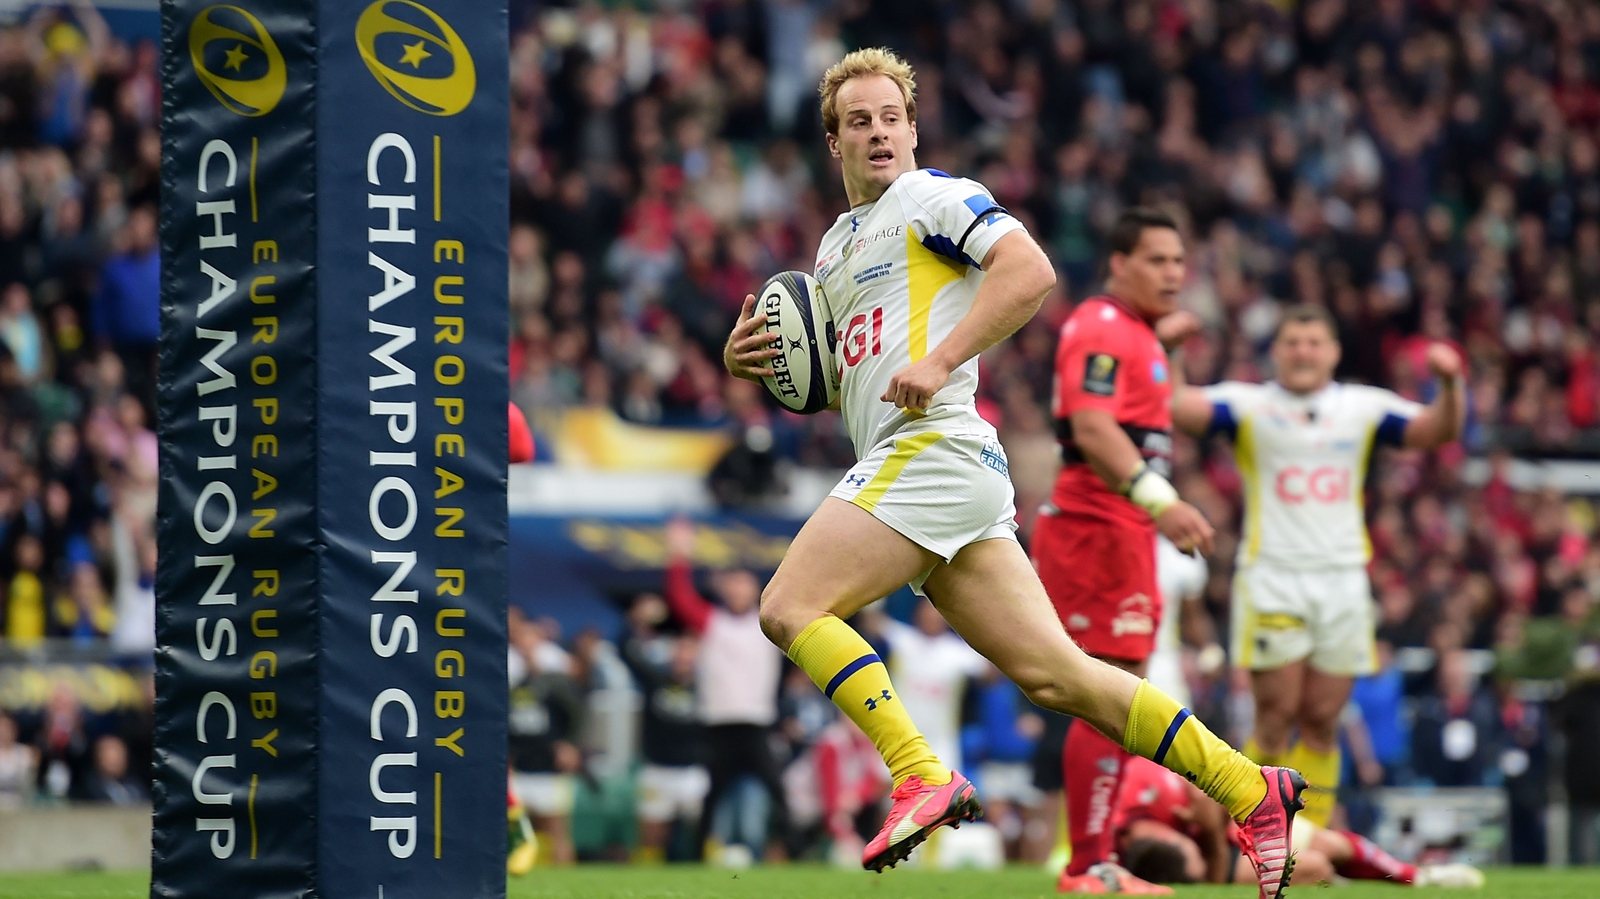 Clermont's Abendanon: 'We can go all the way in Europe' - RTE.ie